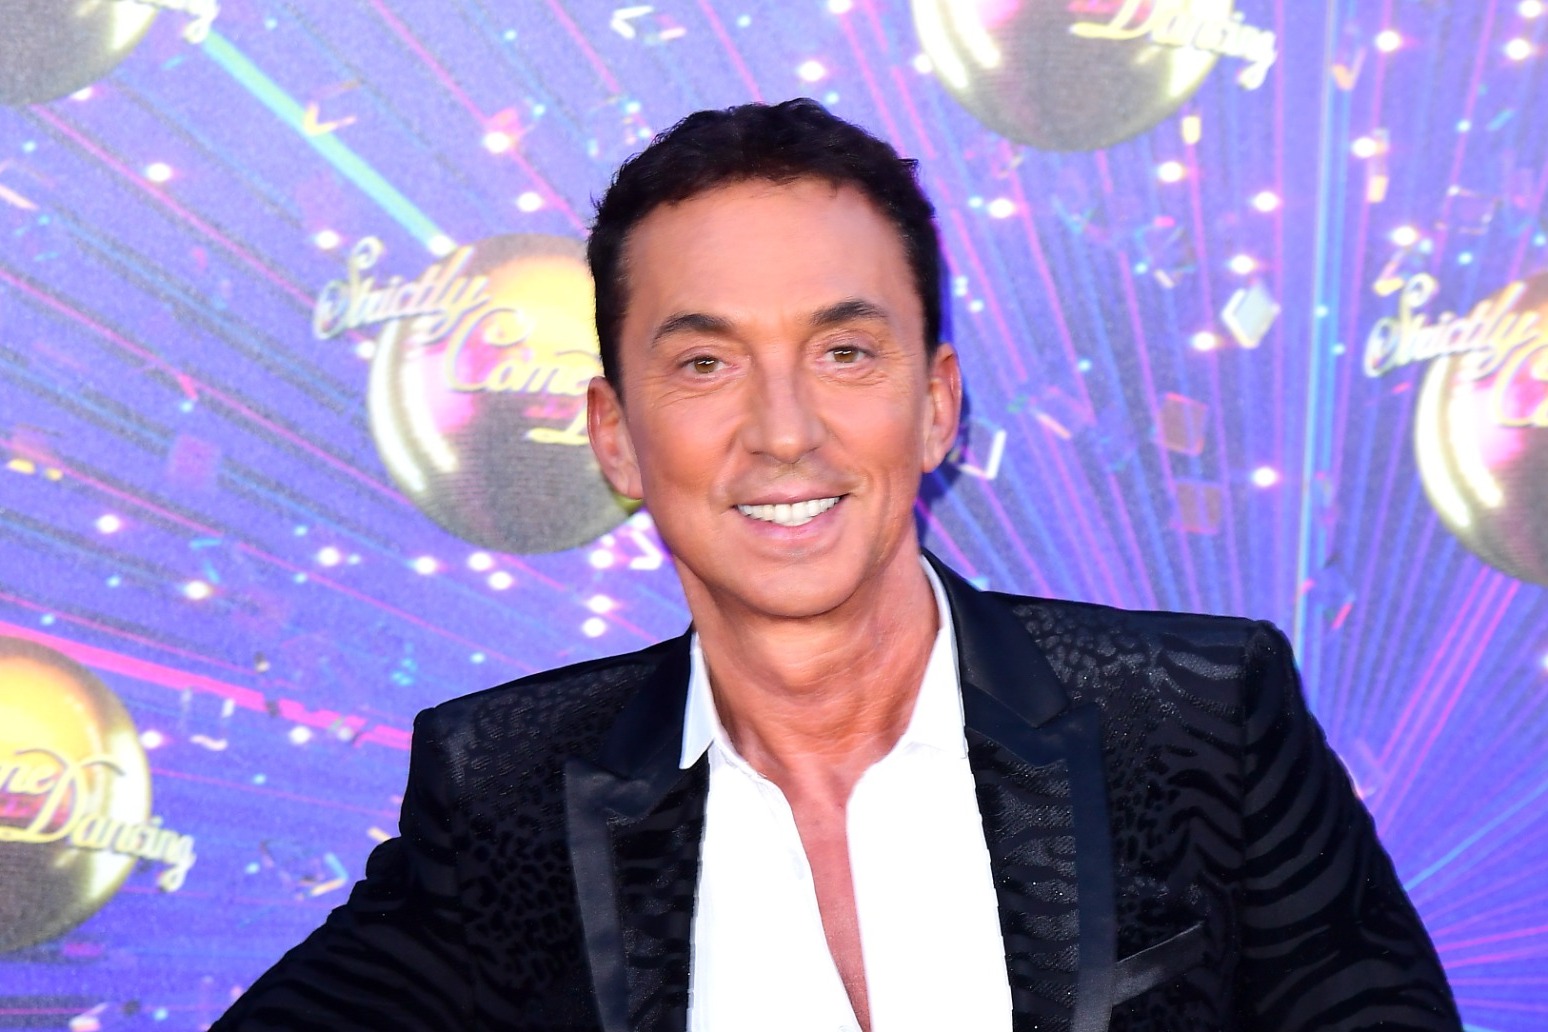 Bruno Tonioli discusses why he left Strictly, saying ‘the schedule was insane’ 